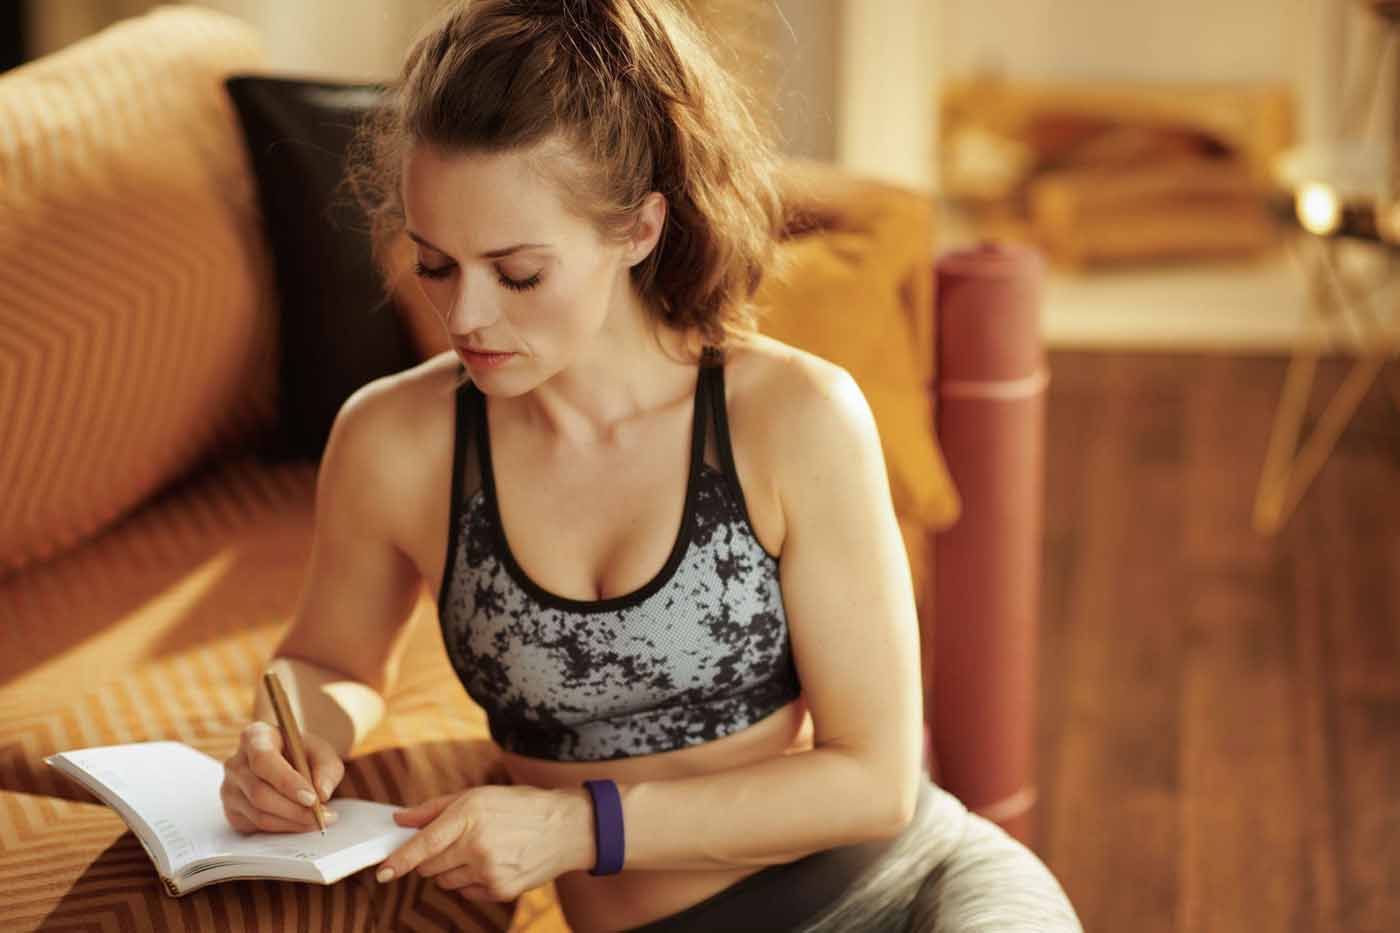 young woman in athletic attire with journal and pen writing goals and training log 